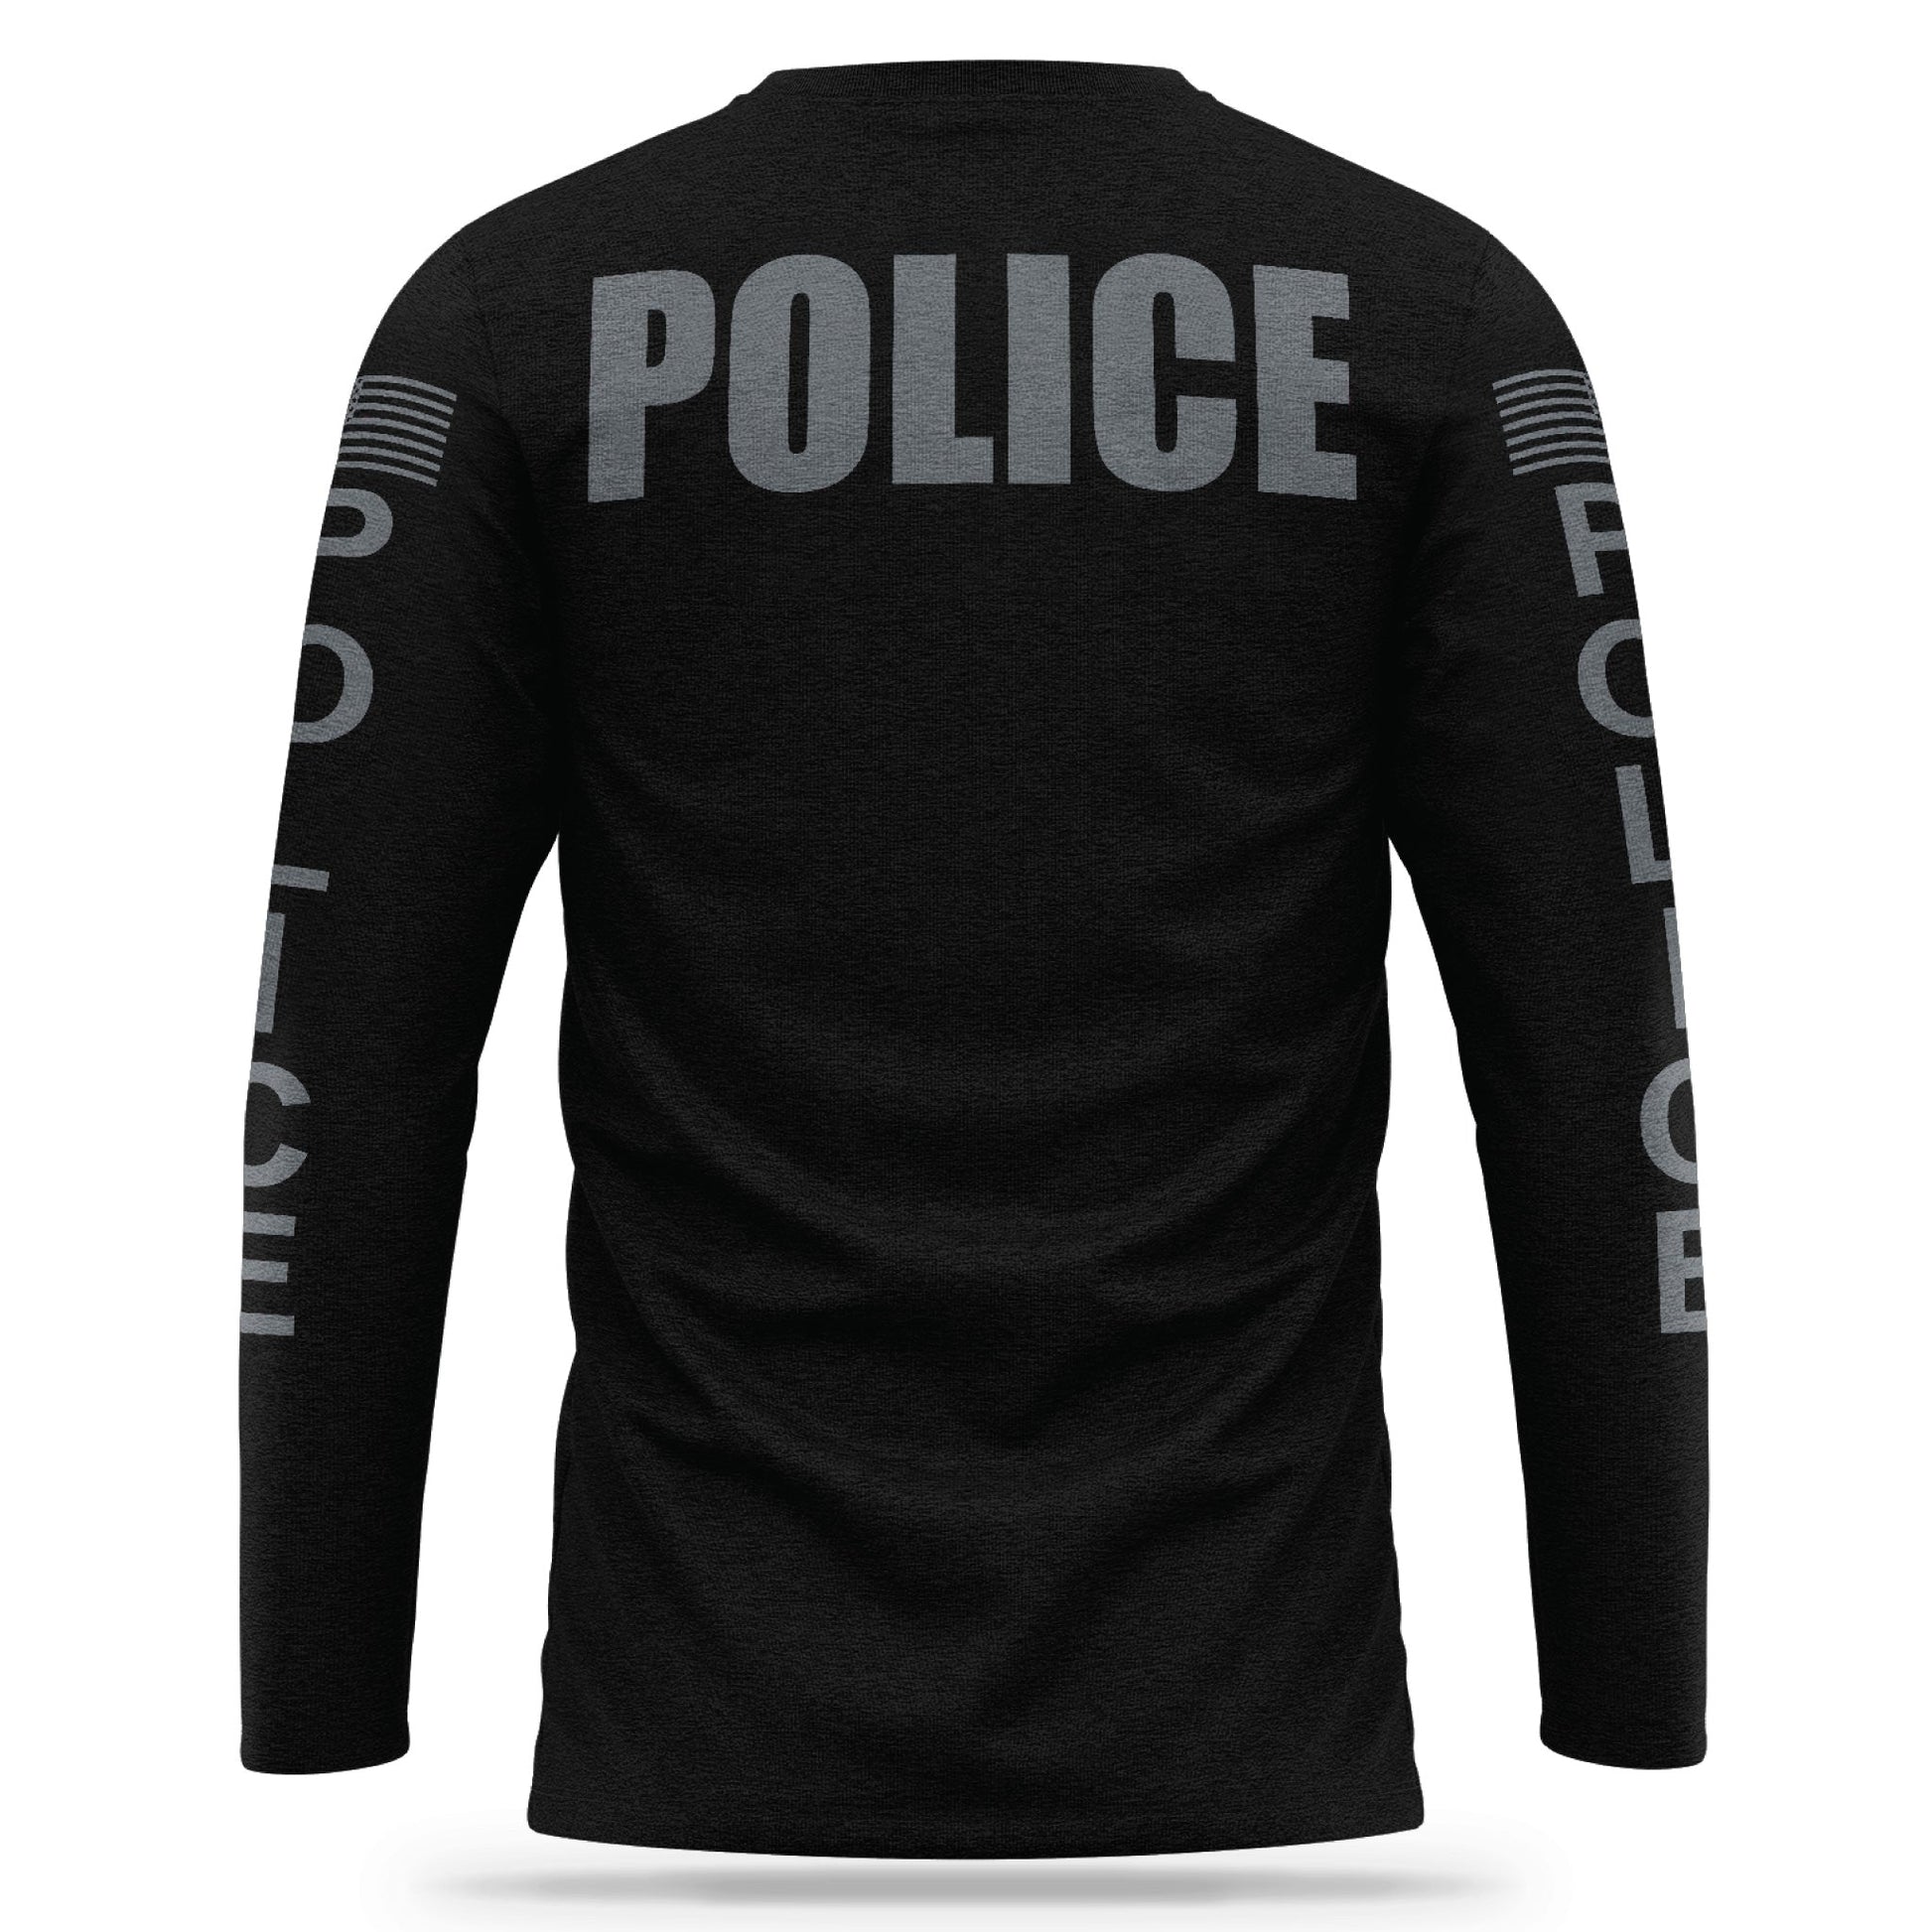 [POLICE] Cotton Blend Long Sleeve [BLK/GRY]-13 Fifty Apparel